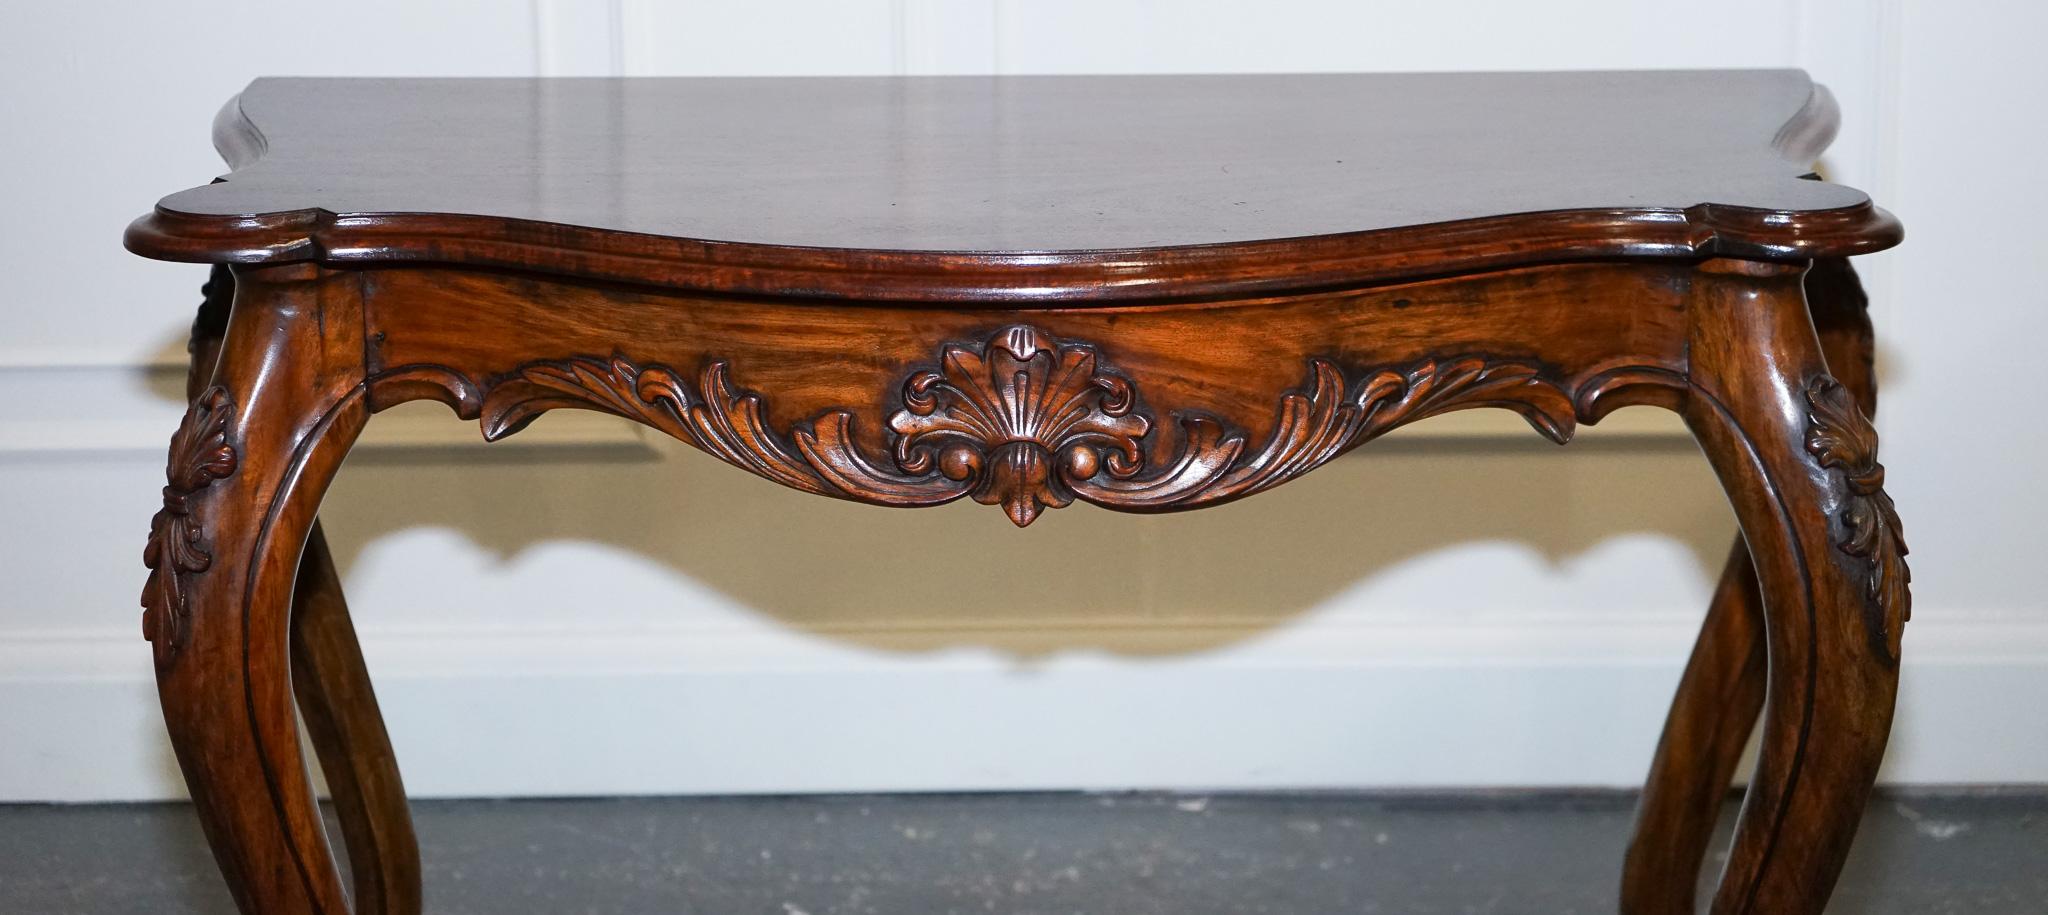 Hand-Crafted Late 19th Century Carved French Hall Stand Console Table with Cabriole Legs For Sale